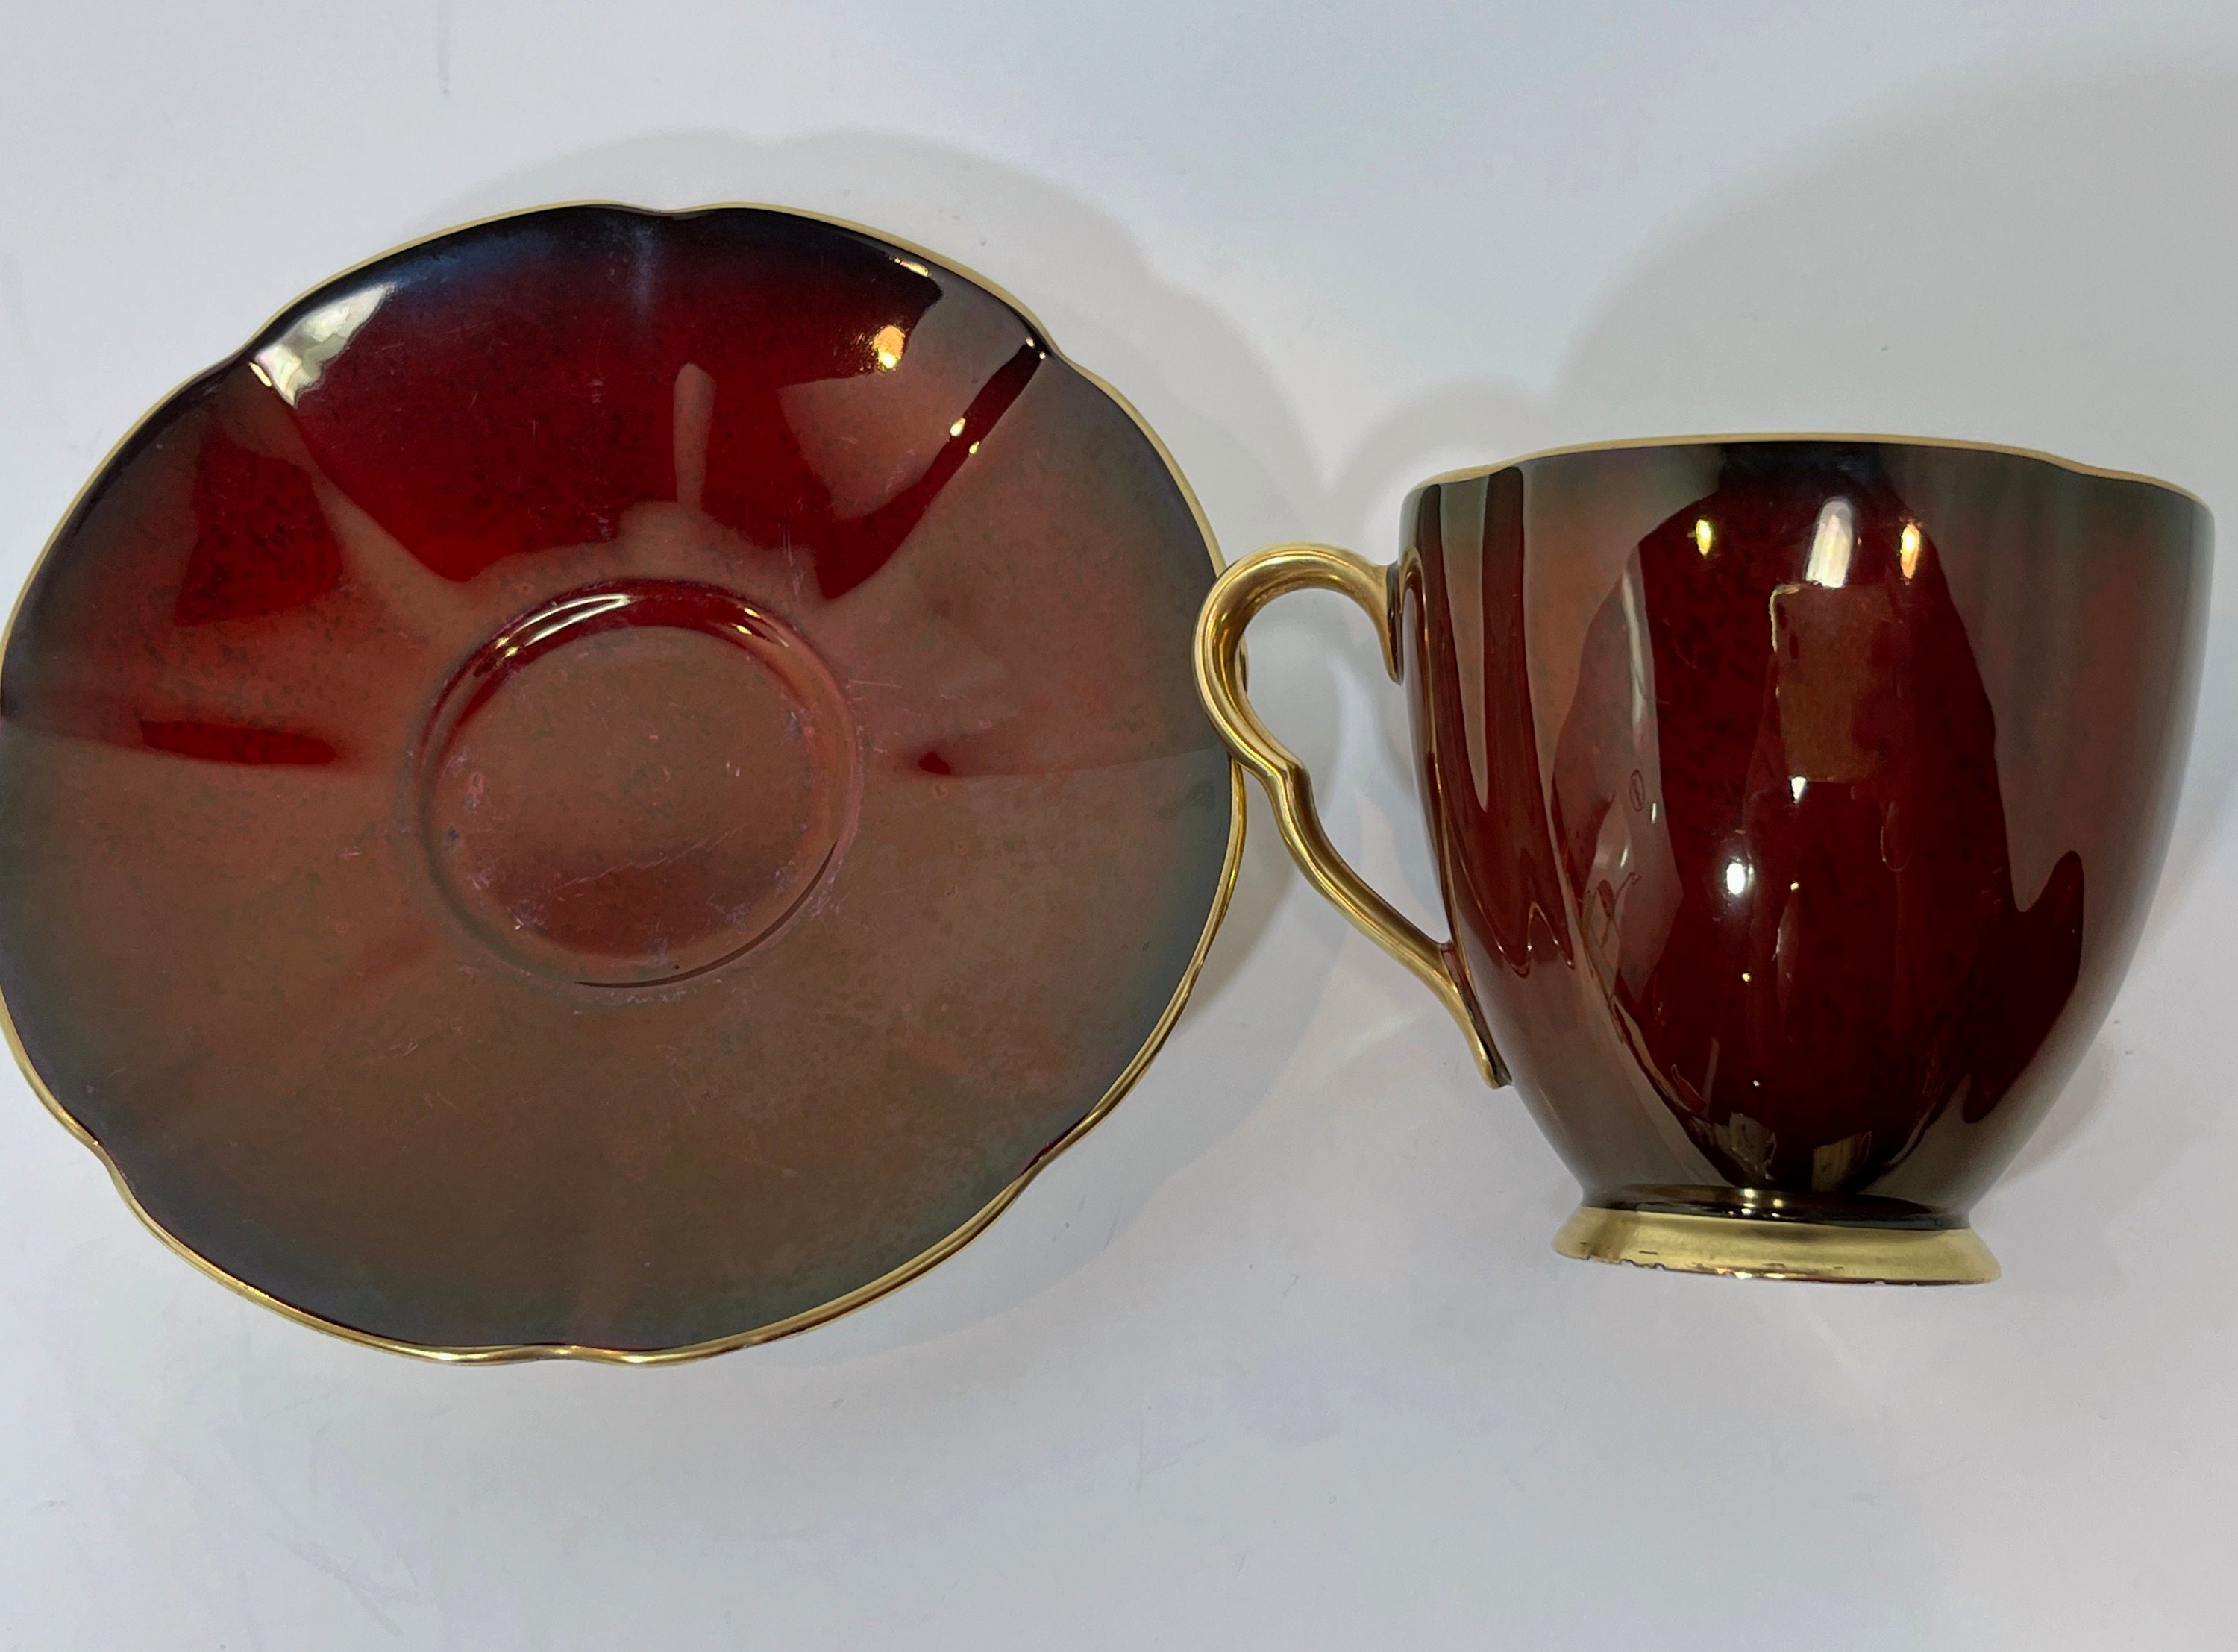 GORGEOUS Vintage Carlton Ware Demitasse Cup and Saucer, Rouge Royale - Ruby  Lane